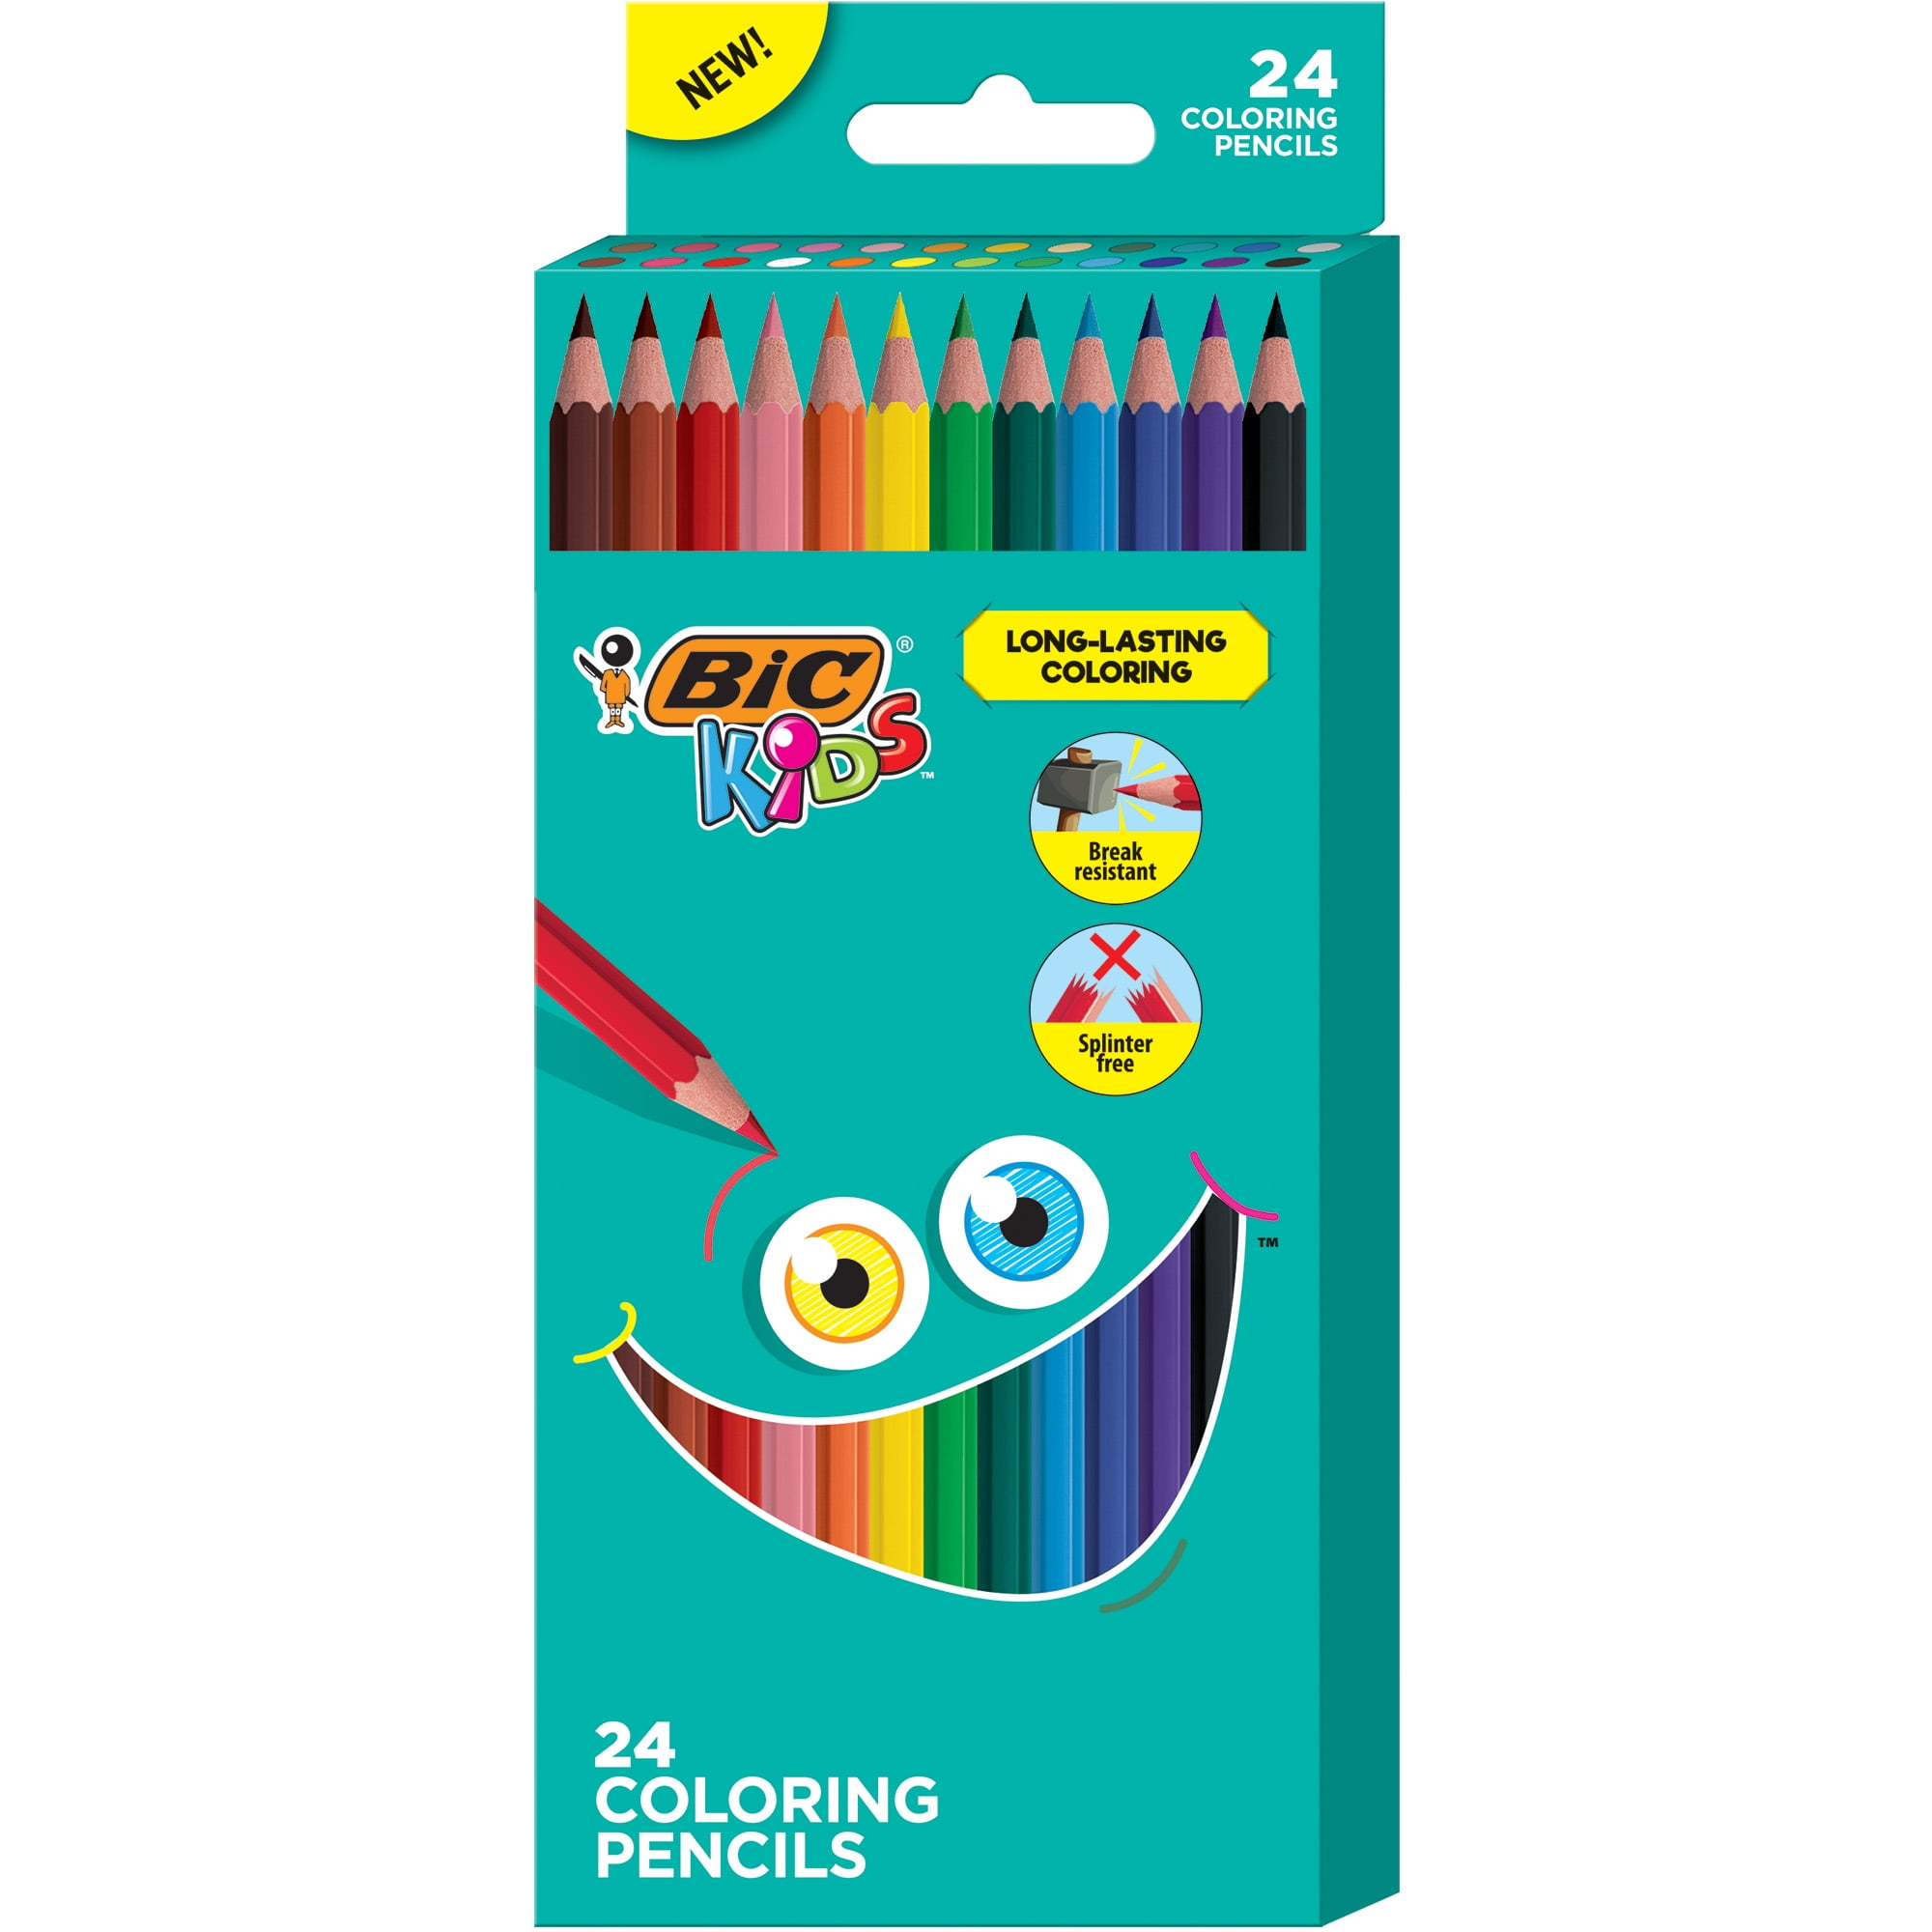 BIC Color Up Colouring felt Pens - , Pack of 24